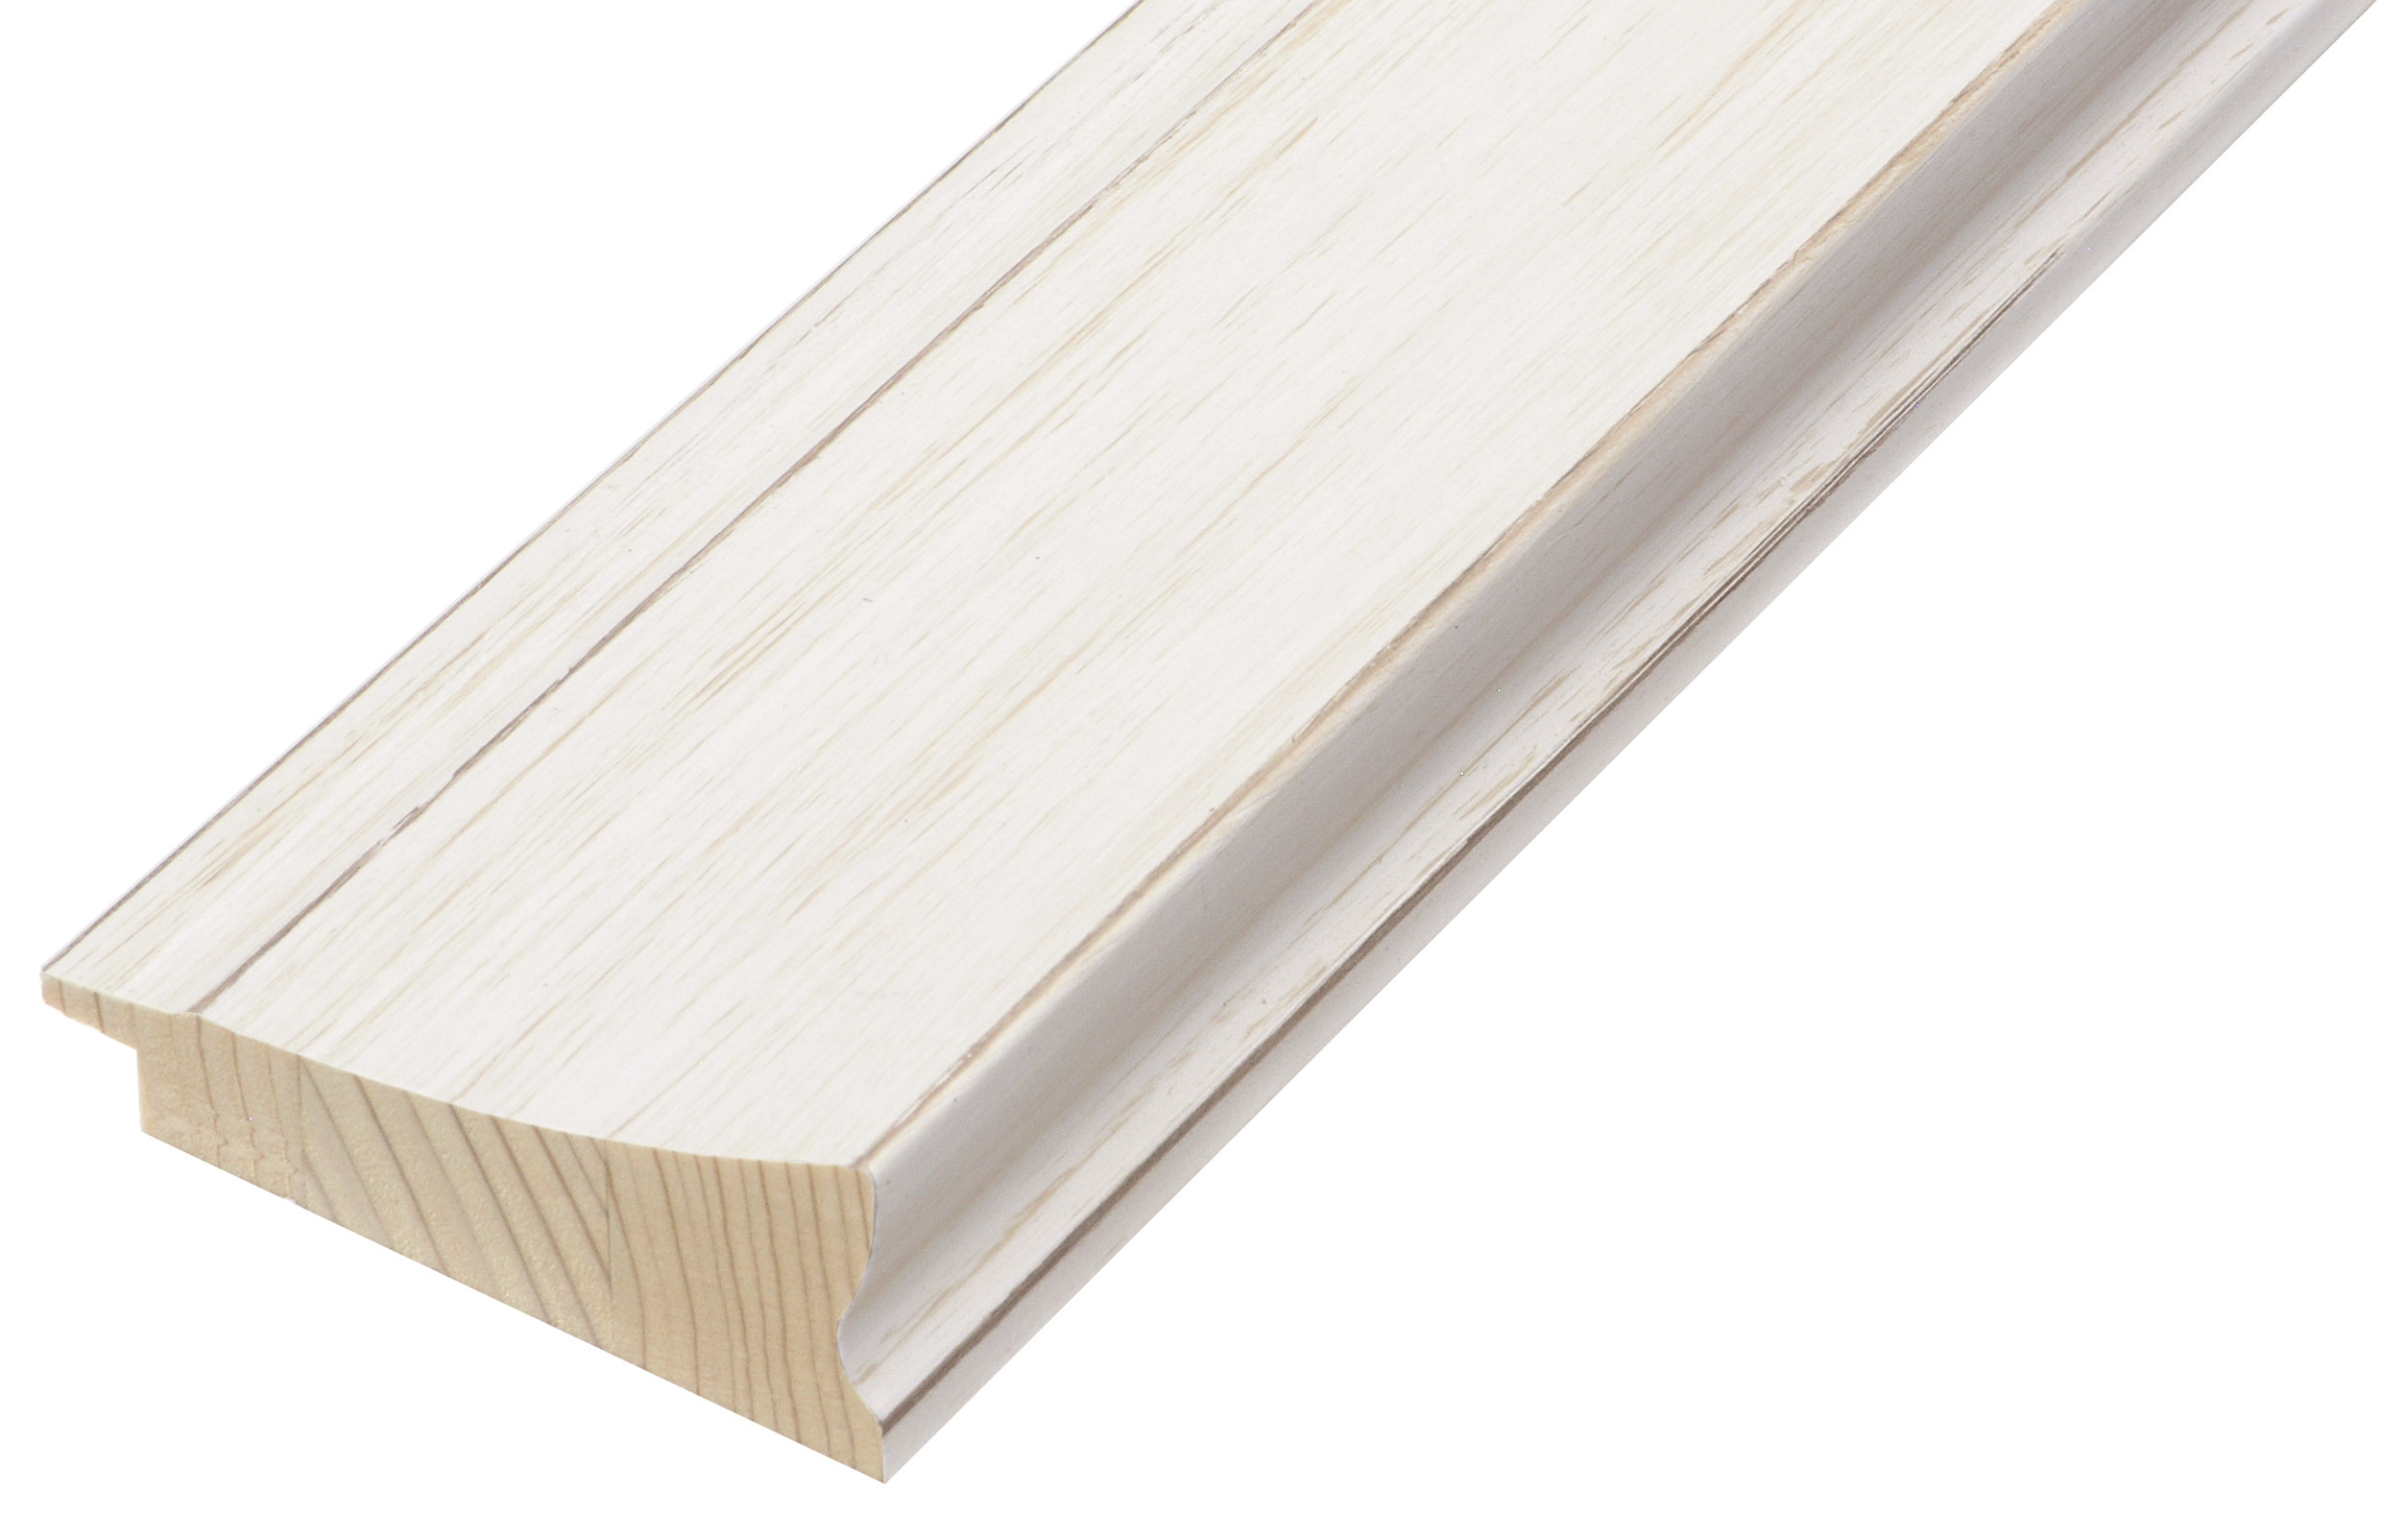 Moulding finger-jointed pine - Width 68mm - Cream finish - 526CREMA